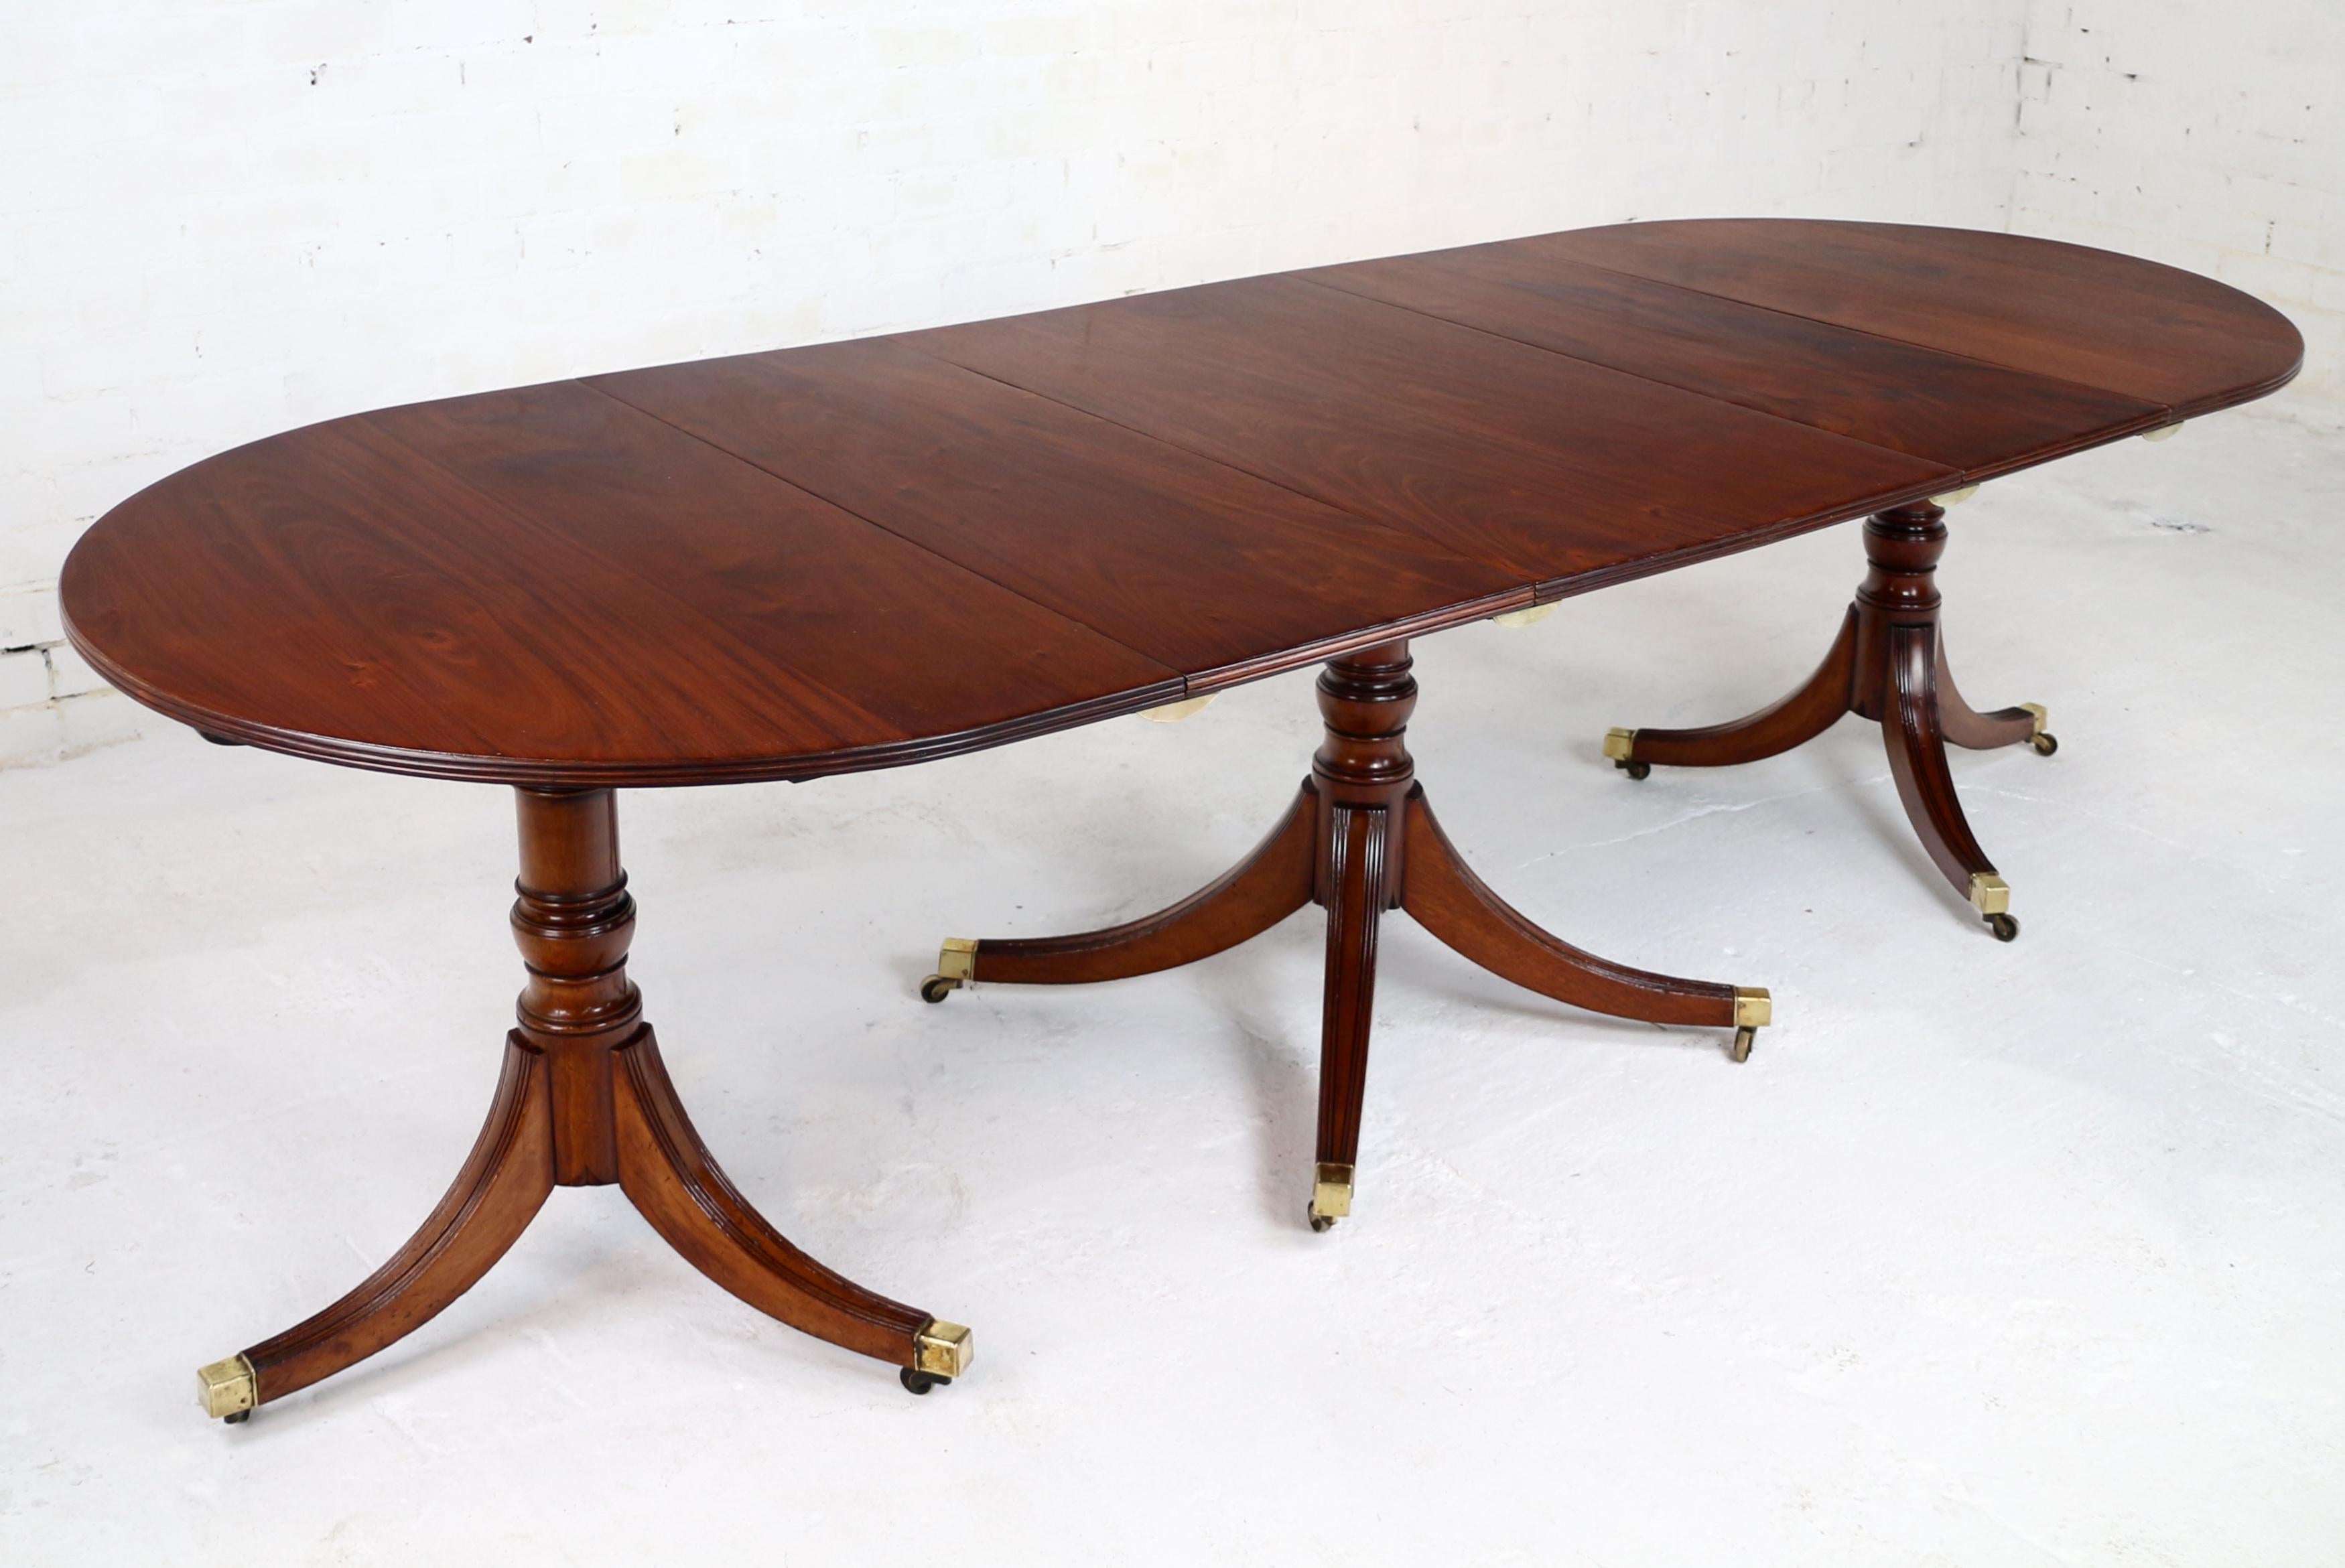 An elegant and well proportioned Regency period English mahogany triple pedestal dining table, constructed from well figured solid mahogany this handsome table comprises two D-shaped ends, centre section and two extension leaves which provide